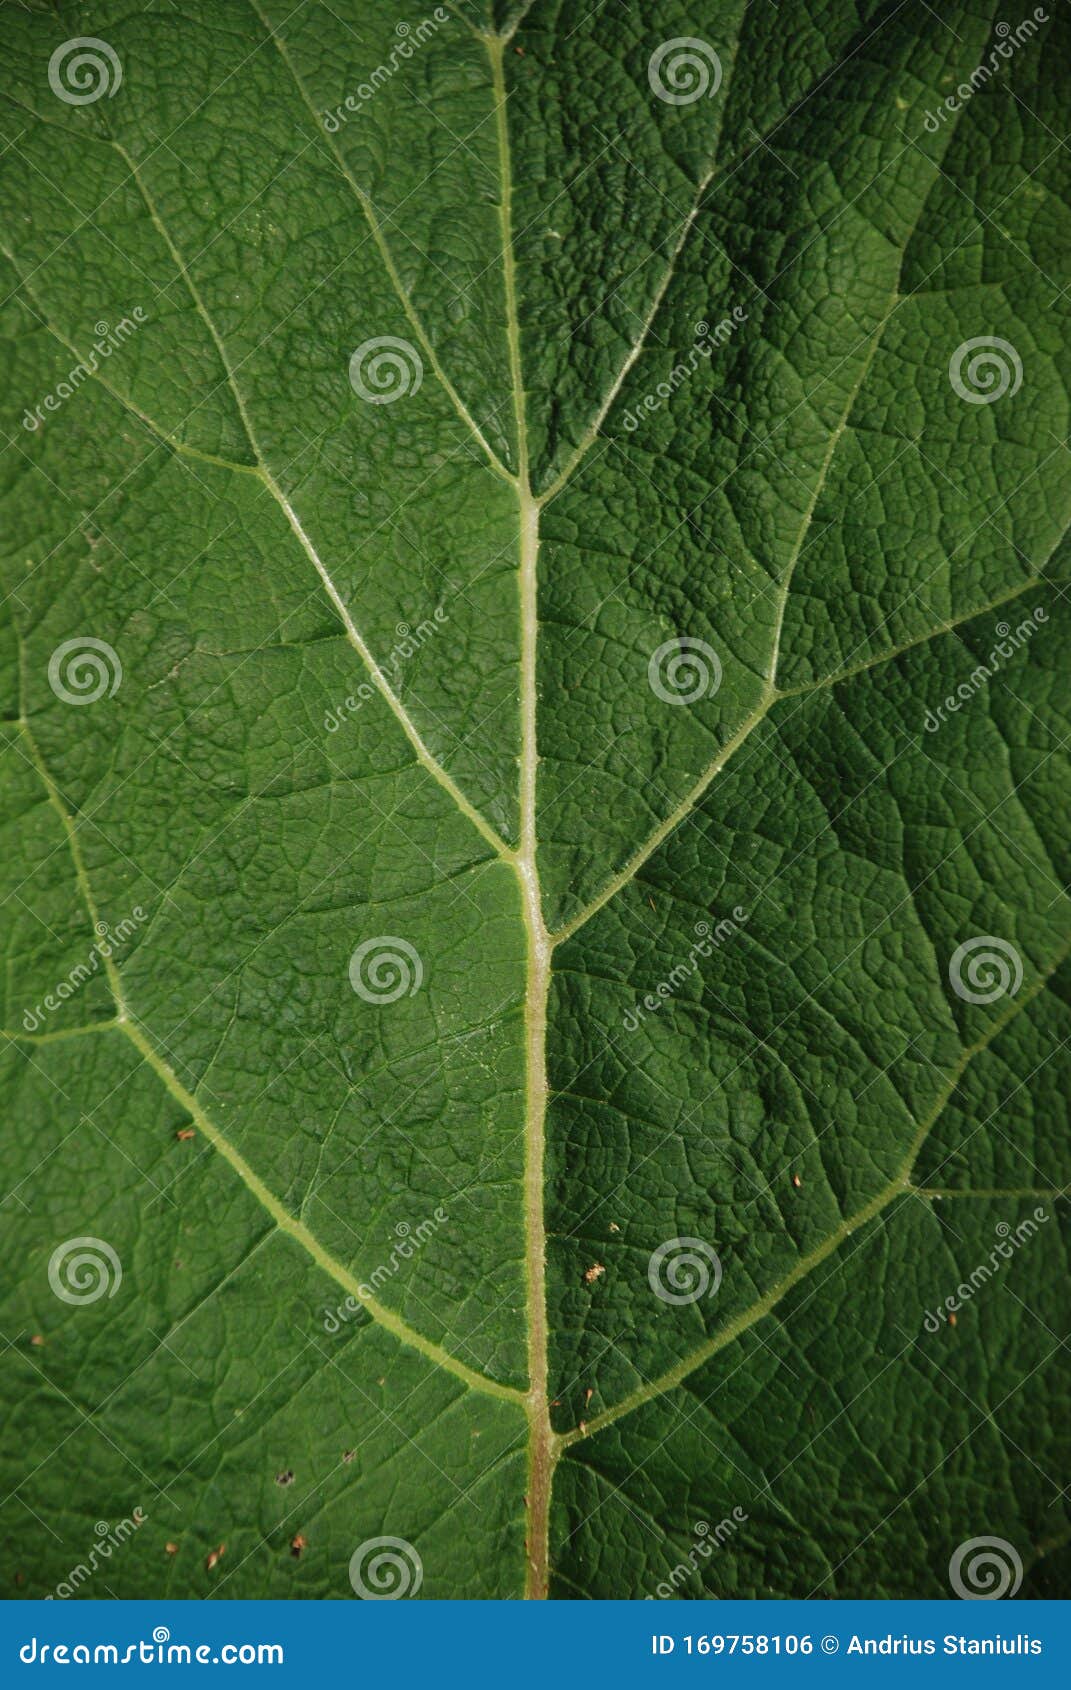 a nice leaf texture with branching yellow veins